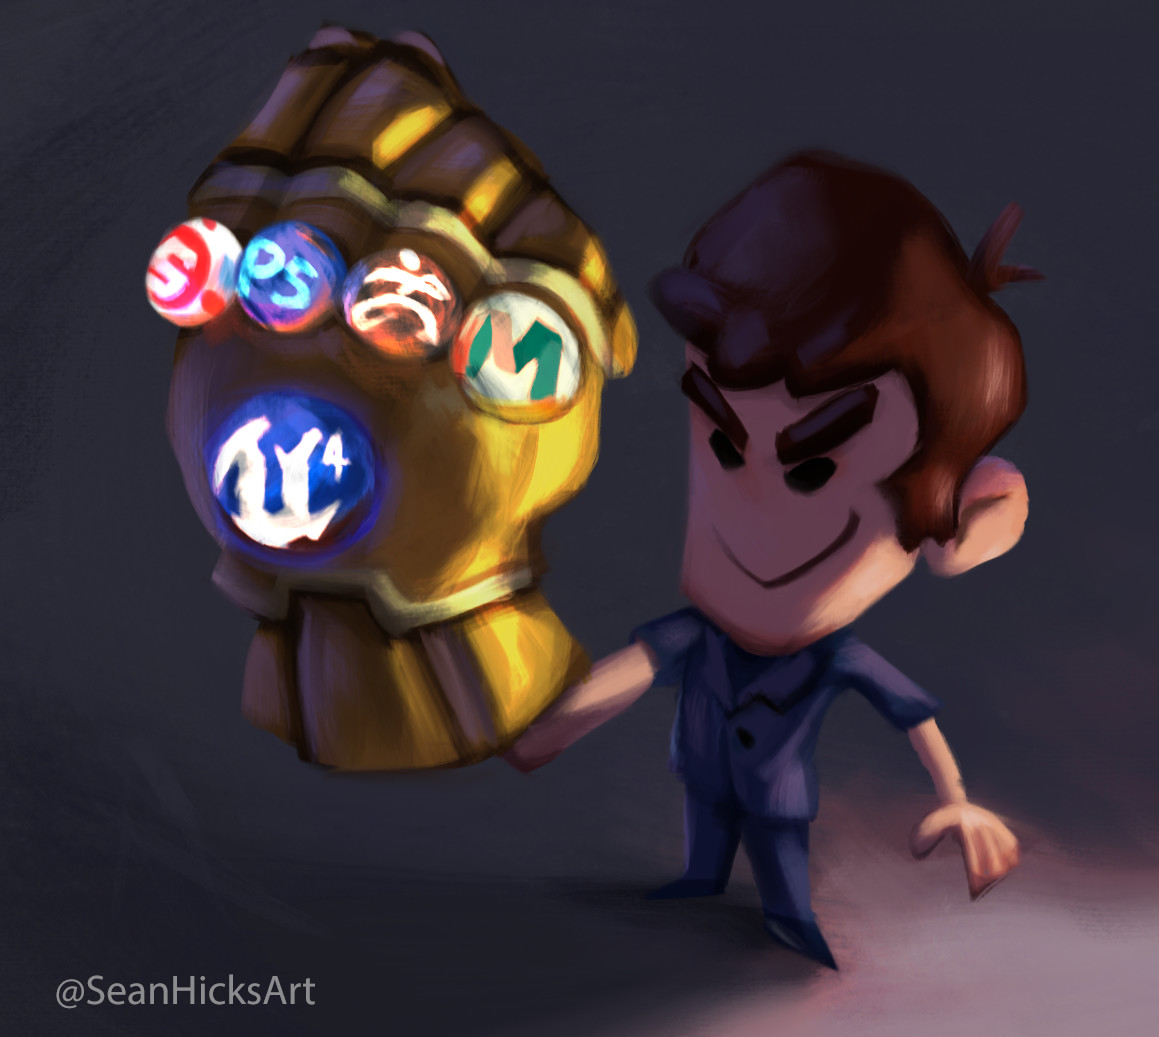 "Fun isn’t something one considers when balancing different programs. But this...does put a smile on my face."